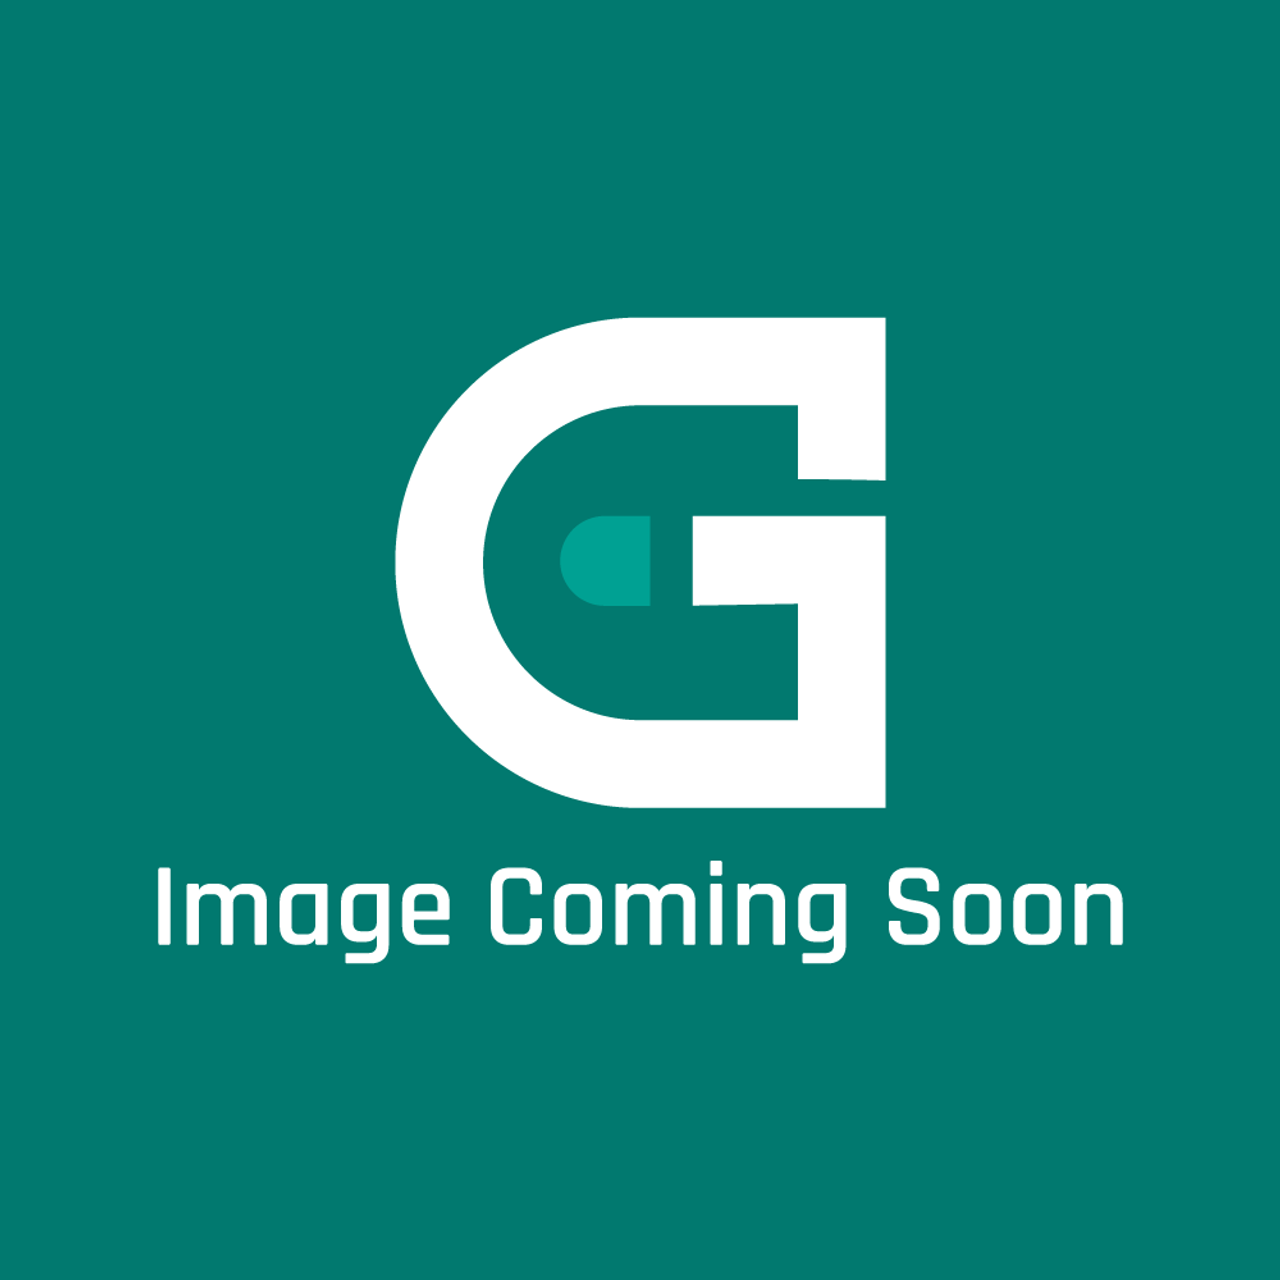 Garland 98021727 - Wok Power Module Complet E 5Kw/ - Image Coming Soon!